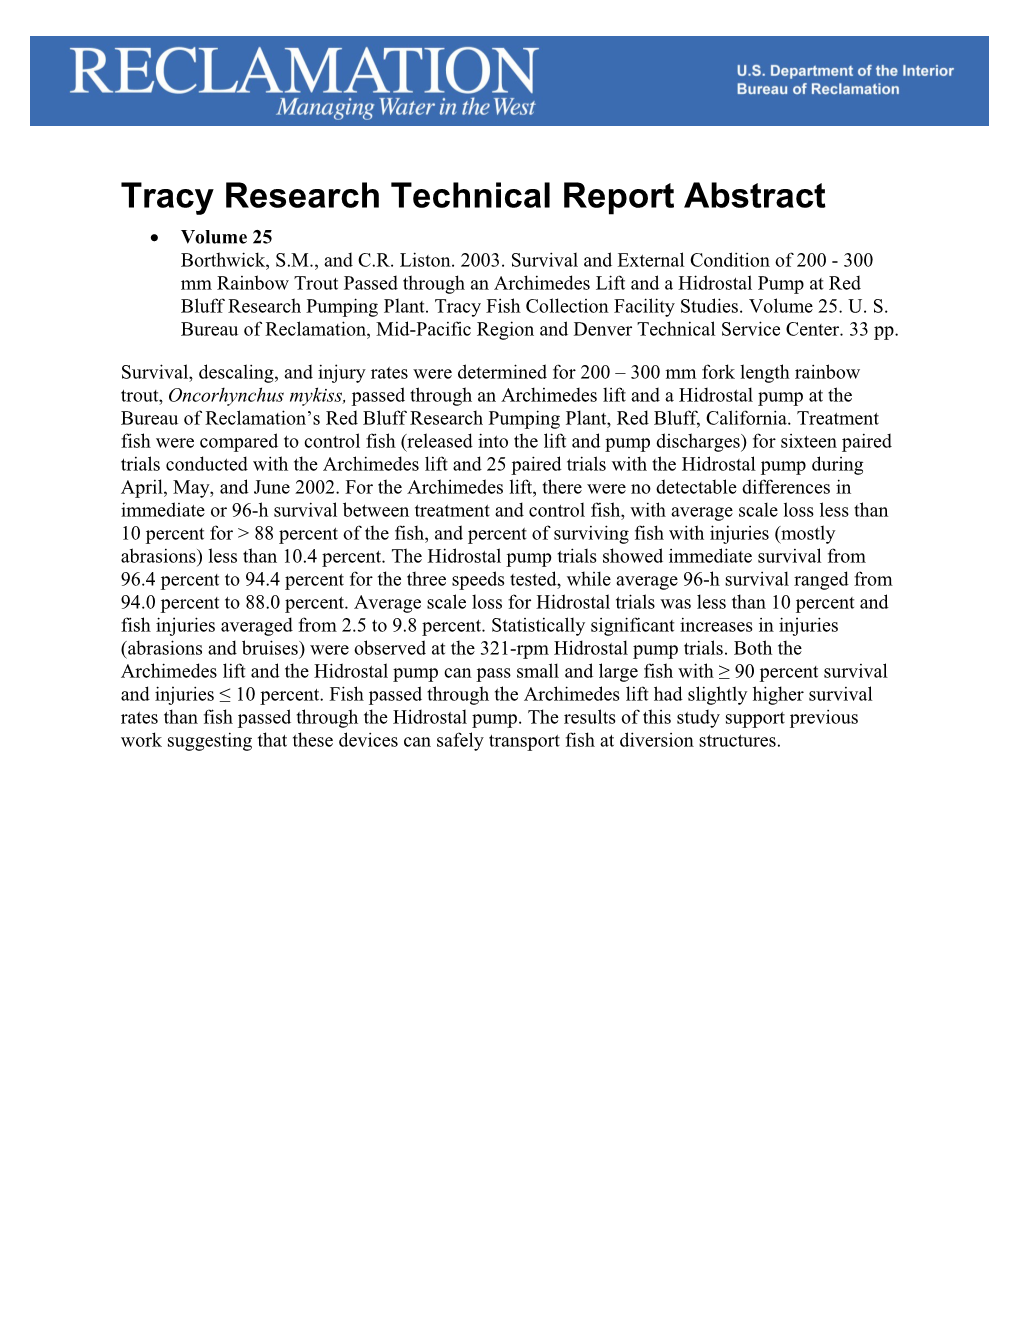 Tracy Research Tech Report Abstract Vol. 25